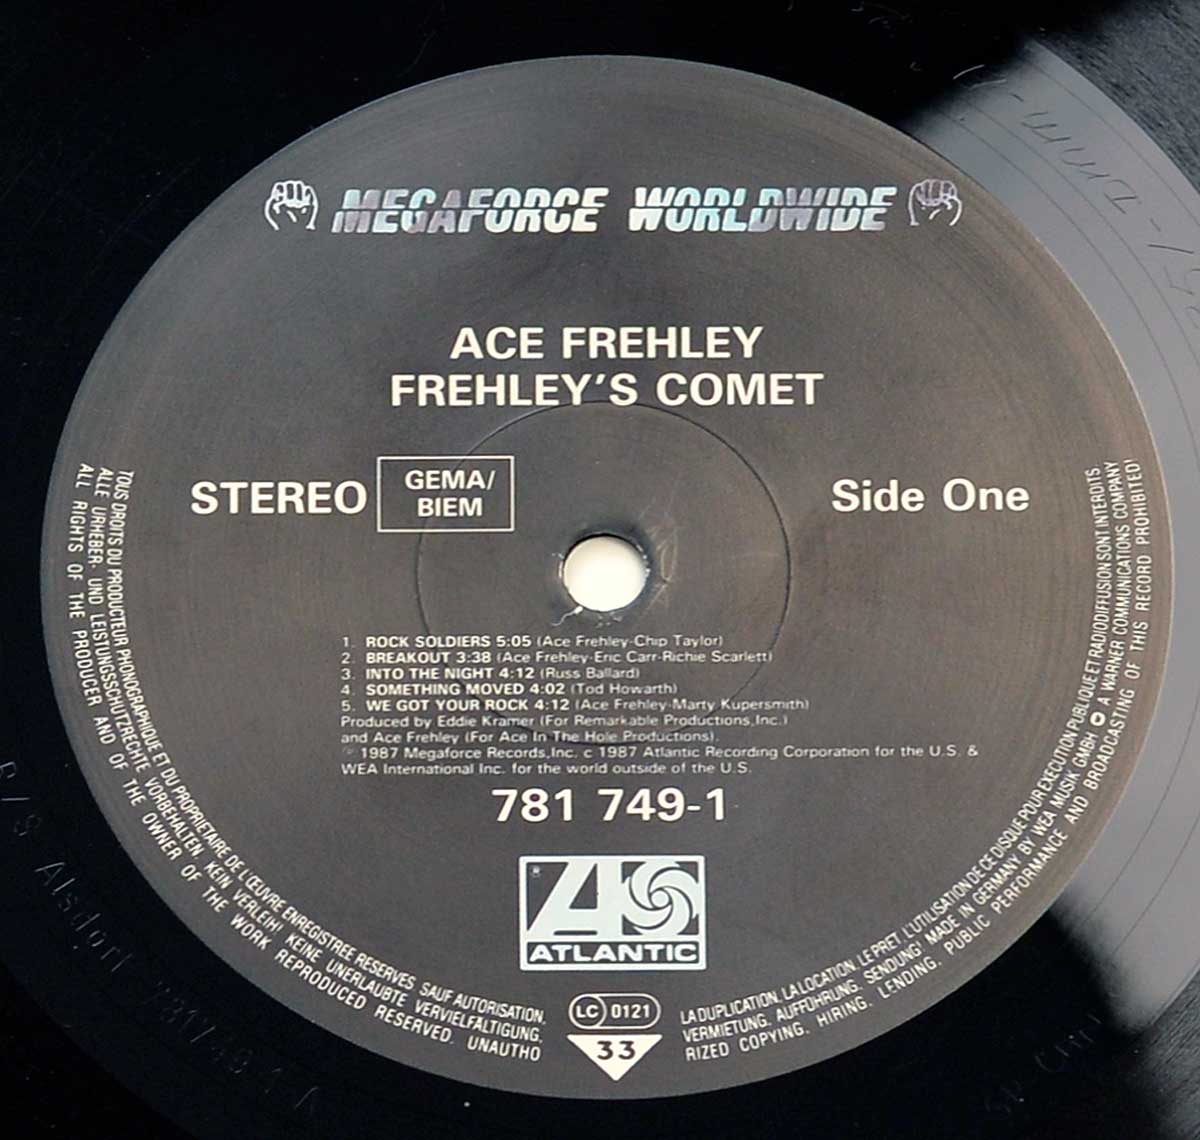 Enlarged High Resolution Photo of the Record's label ACE FREHLEY Frehleys Comet Self-Titled https://vinyl-records.nl